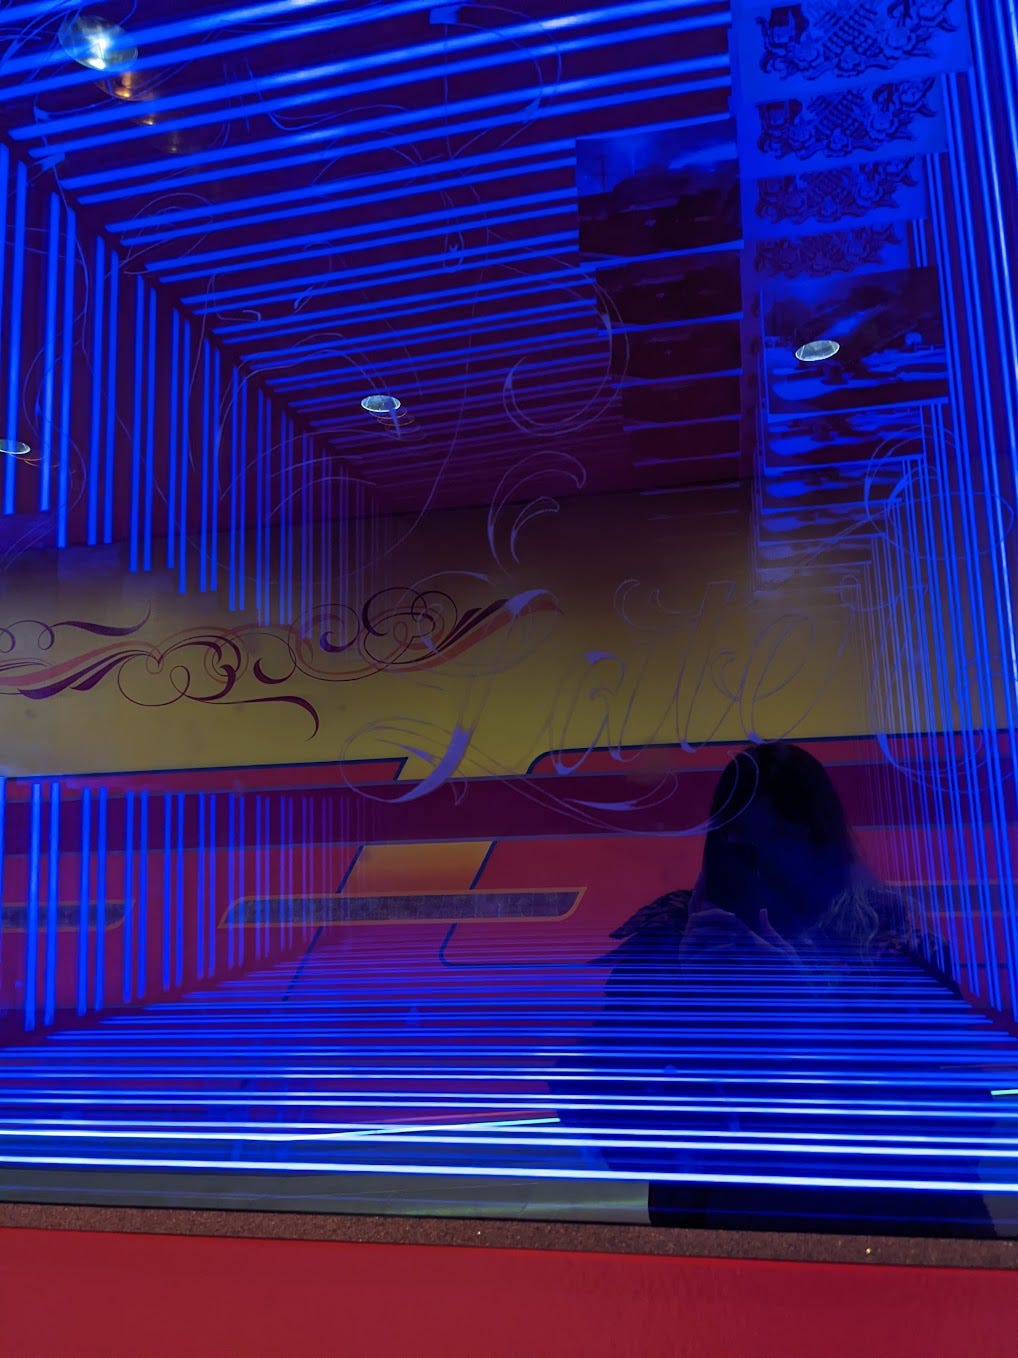 blue striped lights reflecting shadow of a woman and brightly painted wall behind